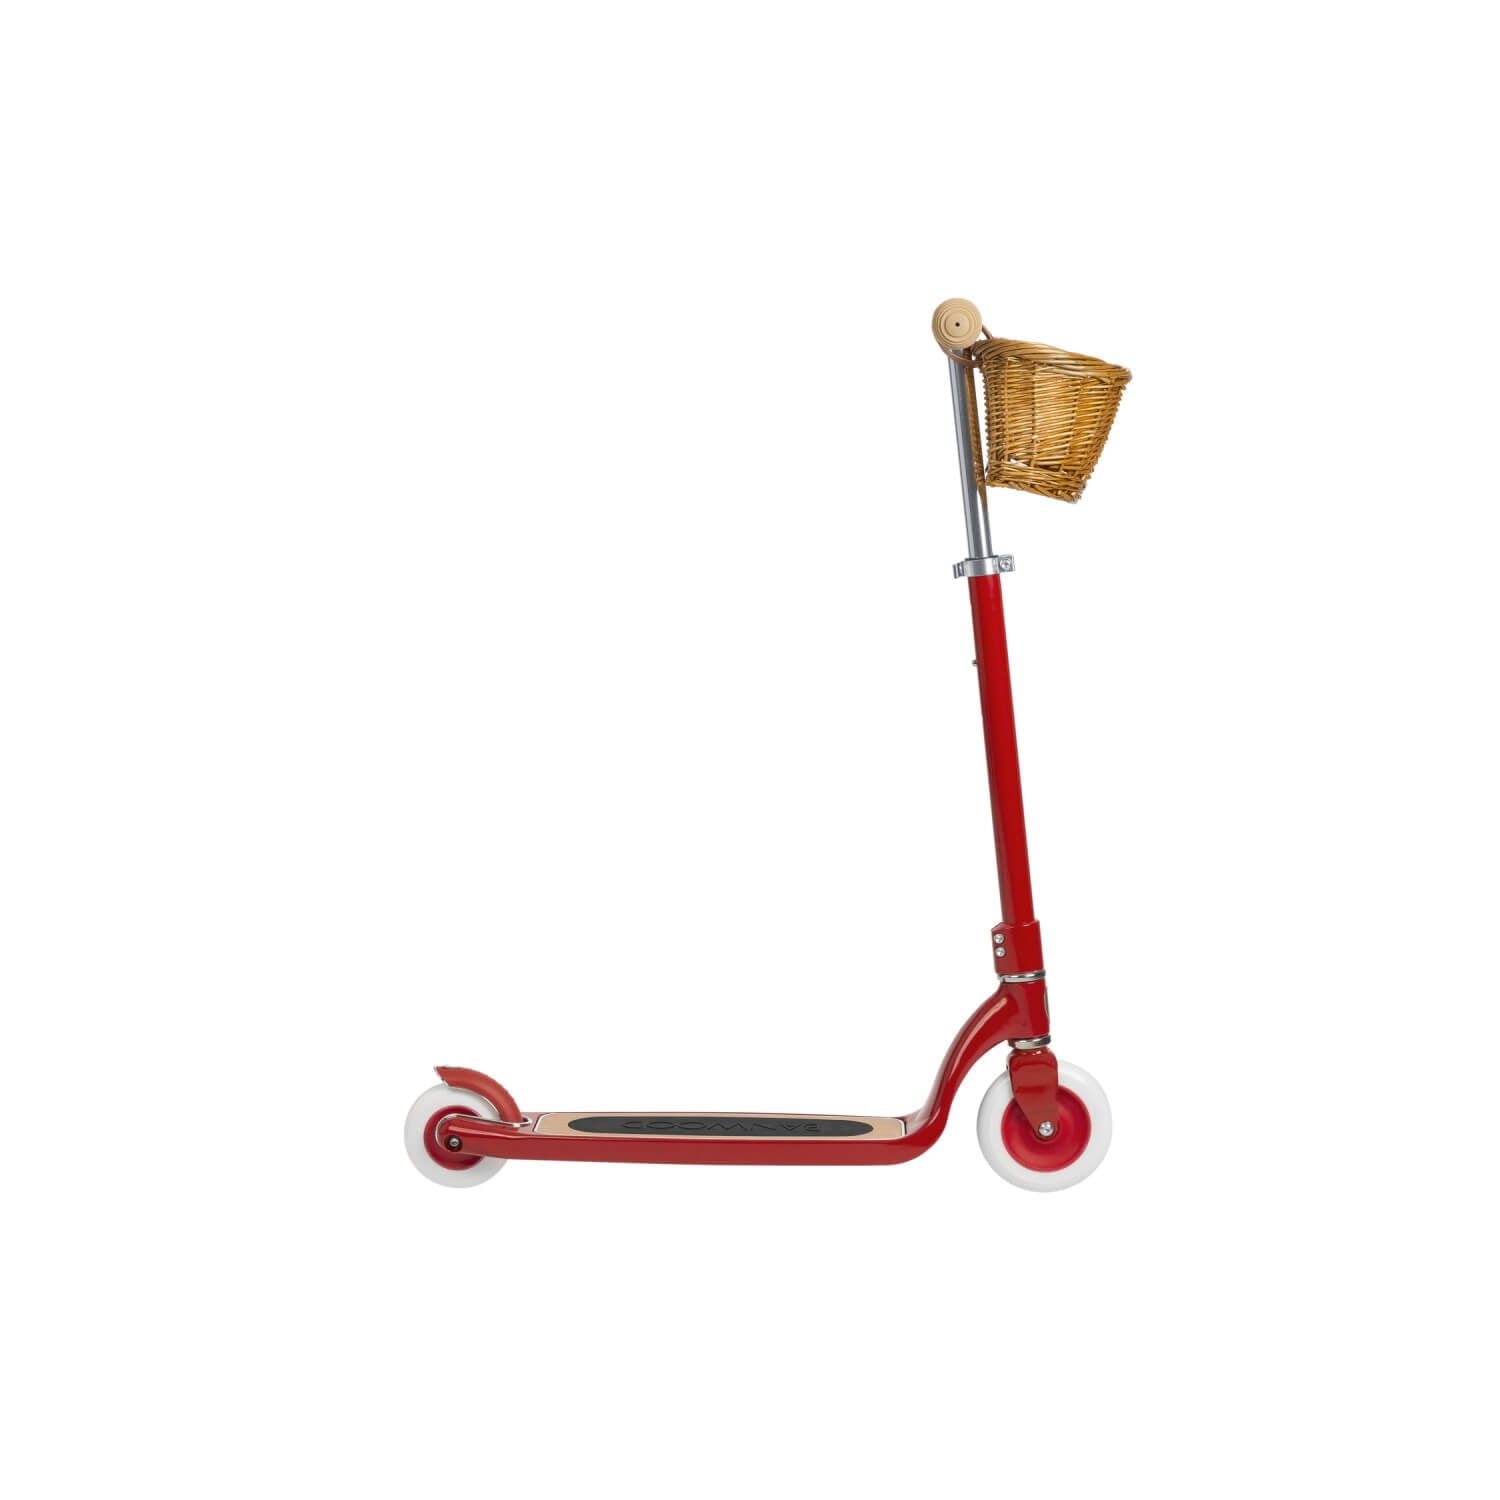 Banwood Maxi Scooter Red